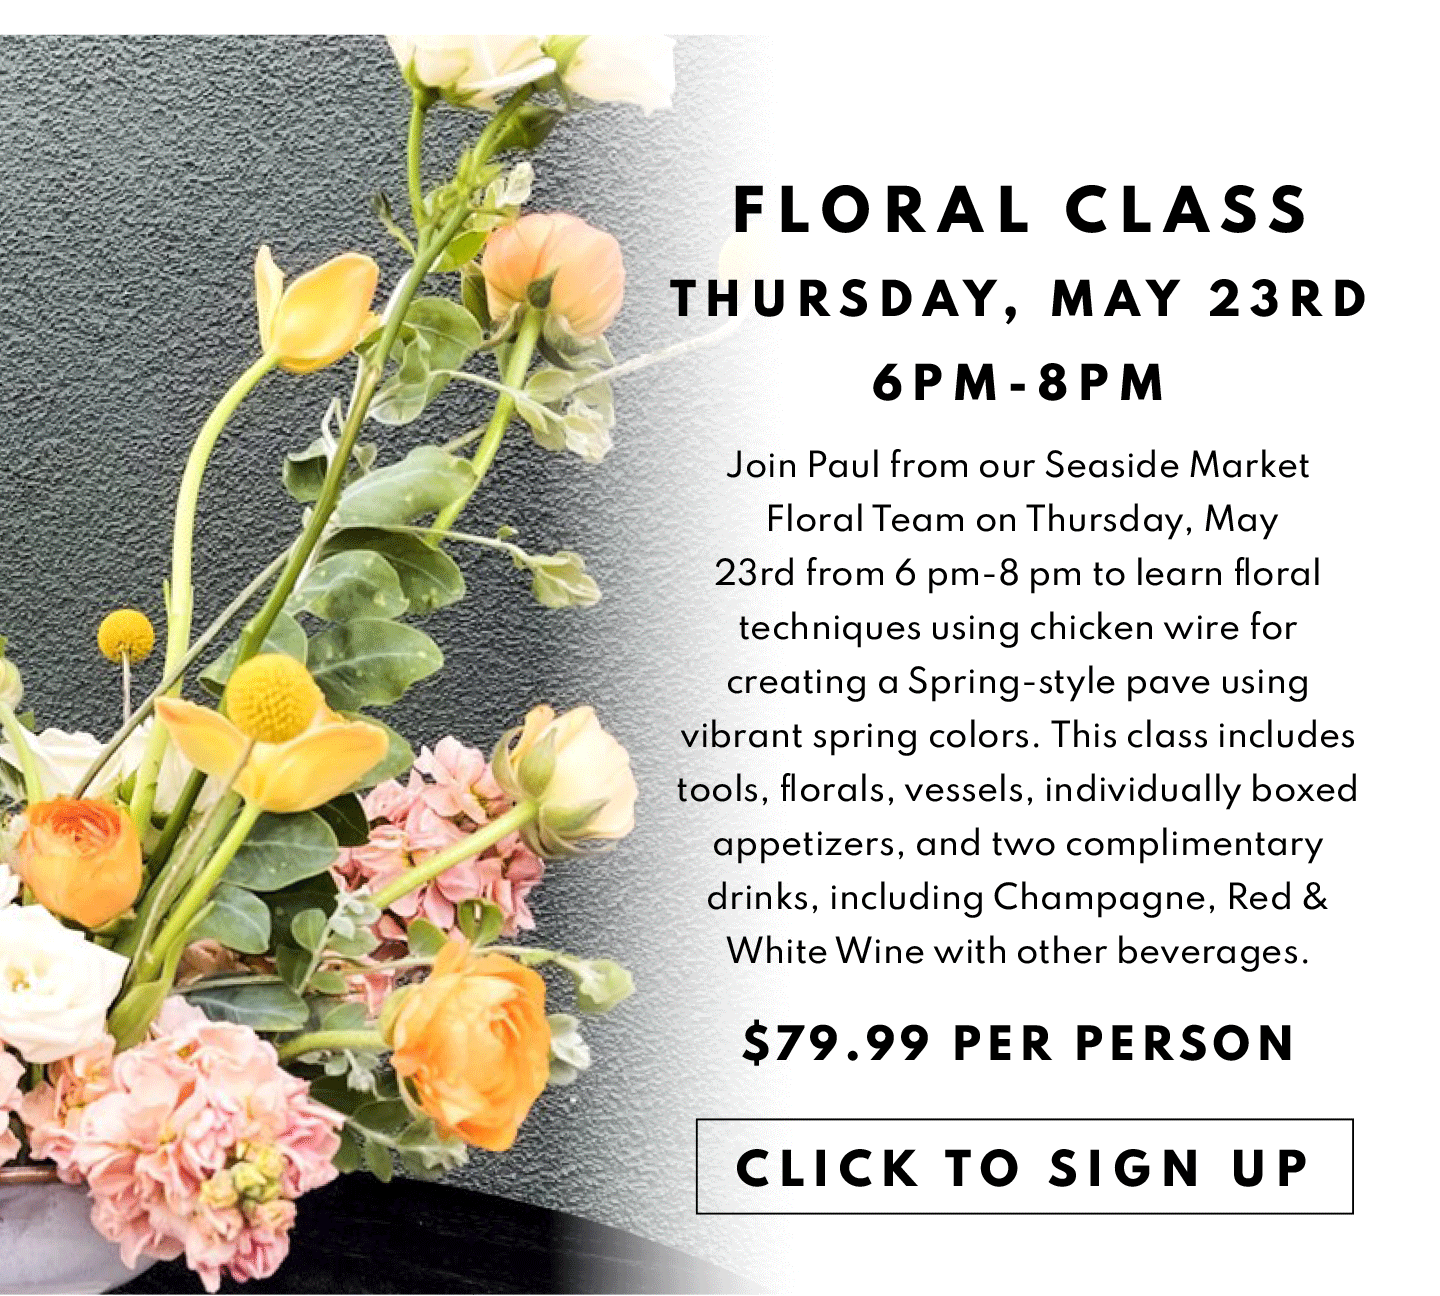 Florcal Class Sign Up! Thurs, MAy 23rd from 6-8,  $79.99 per person